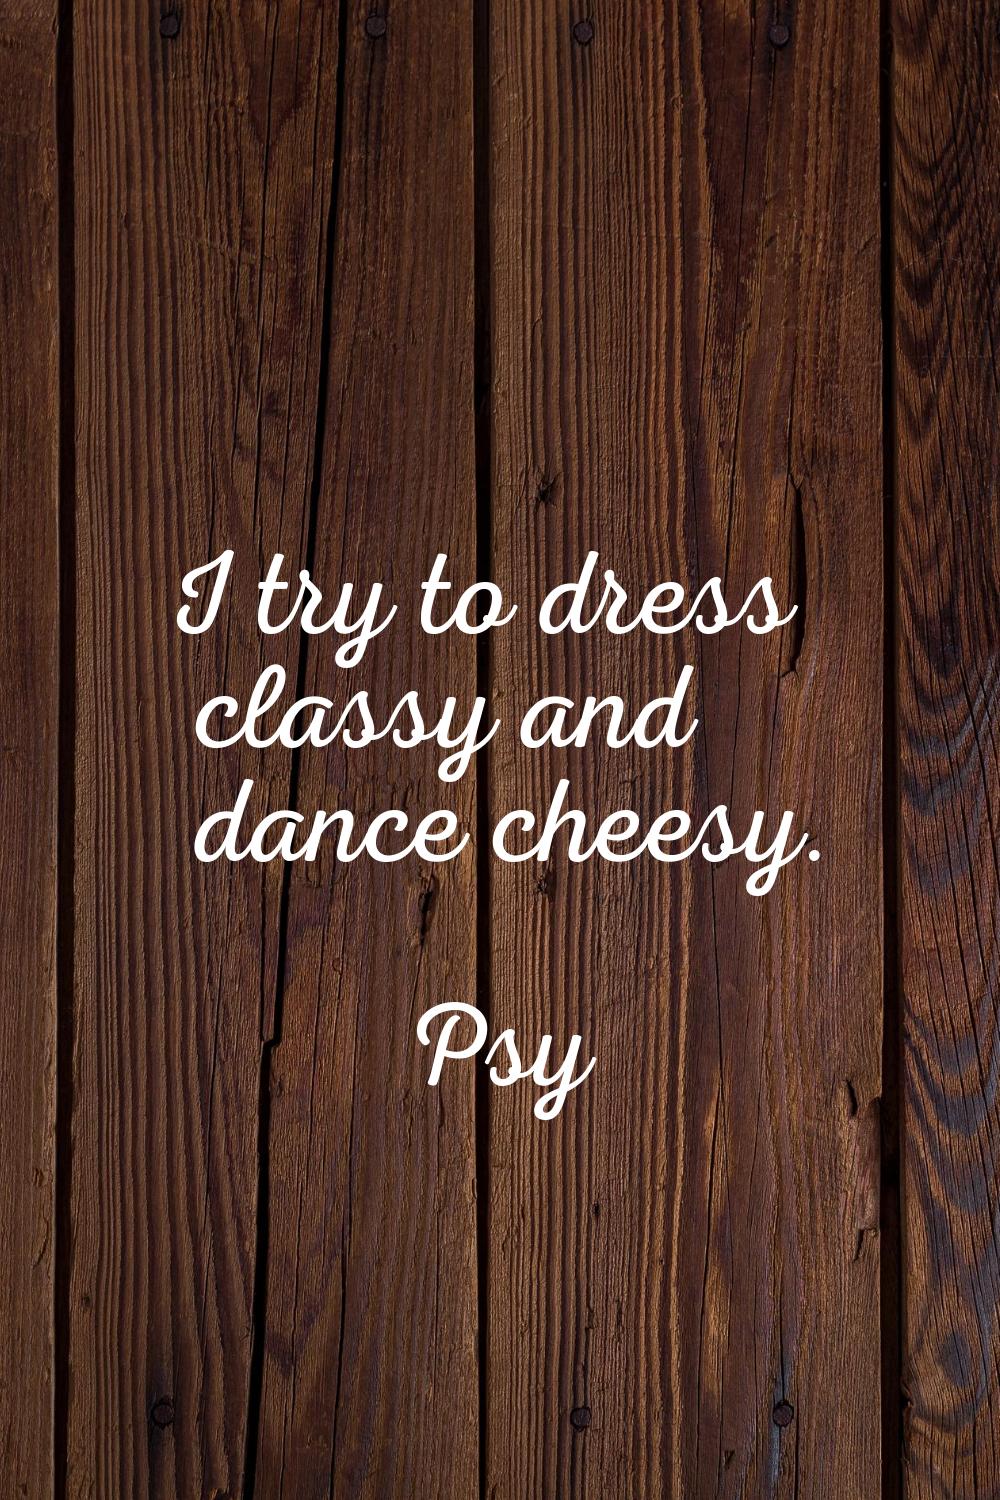 I try to dress classy and dance cheesy.